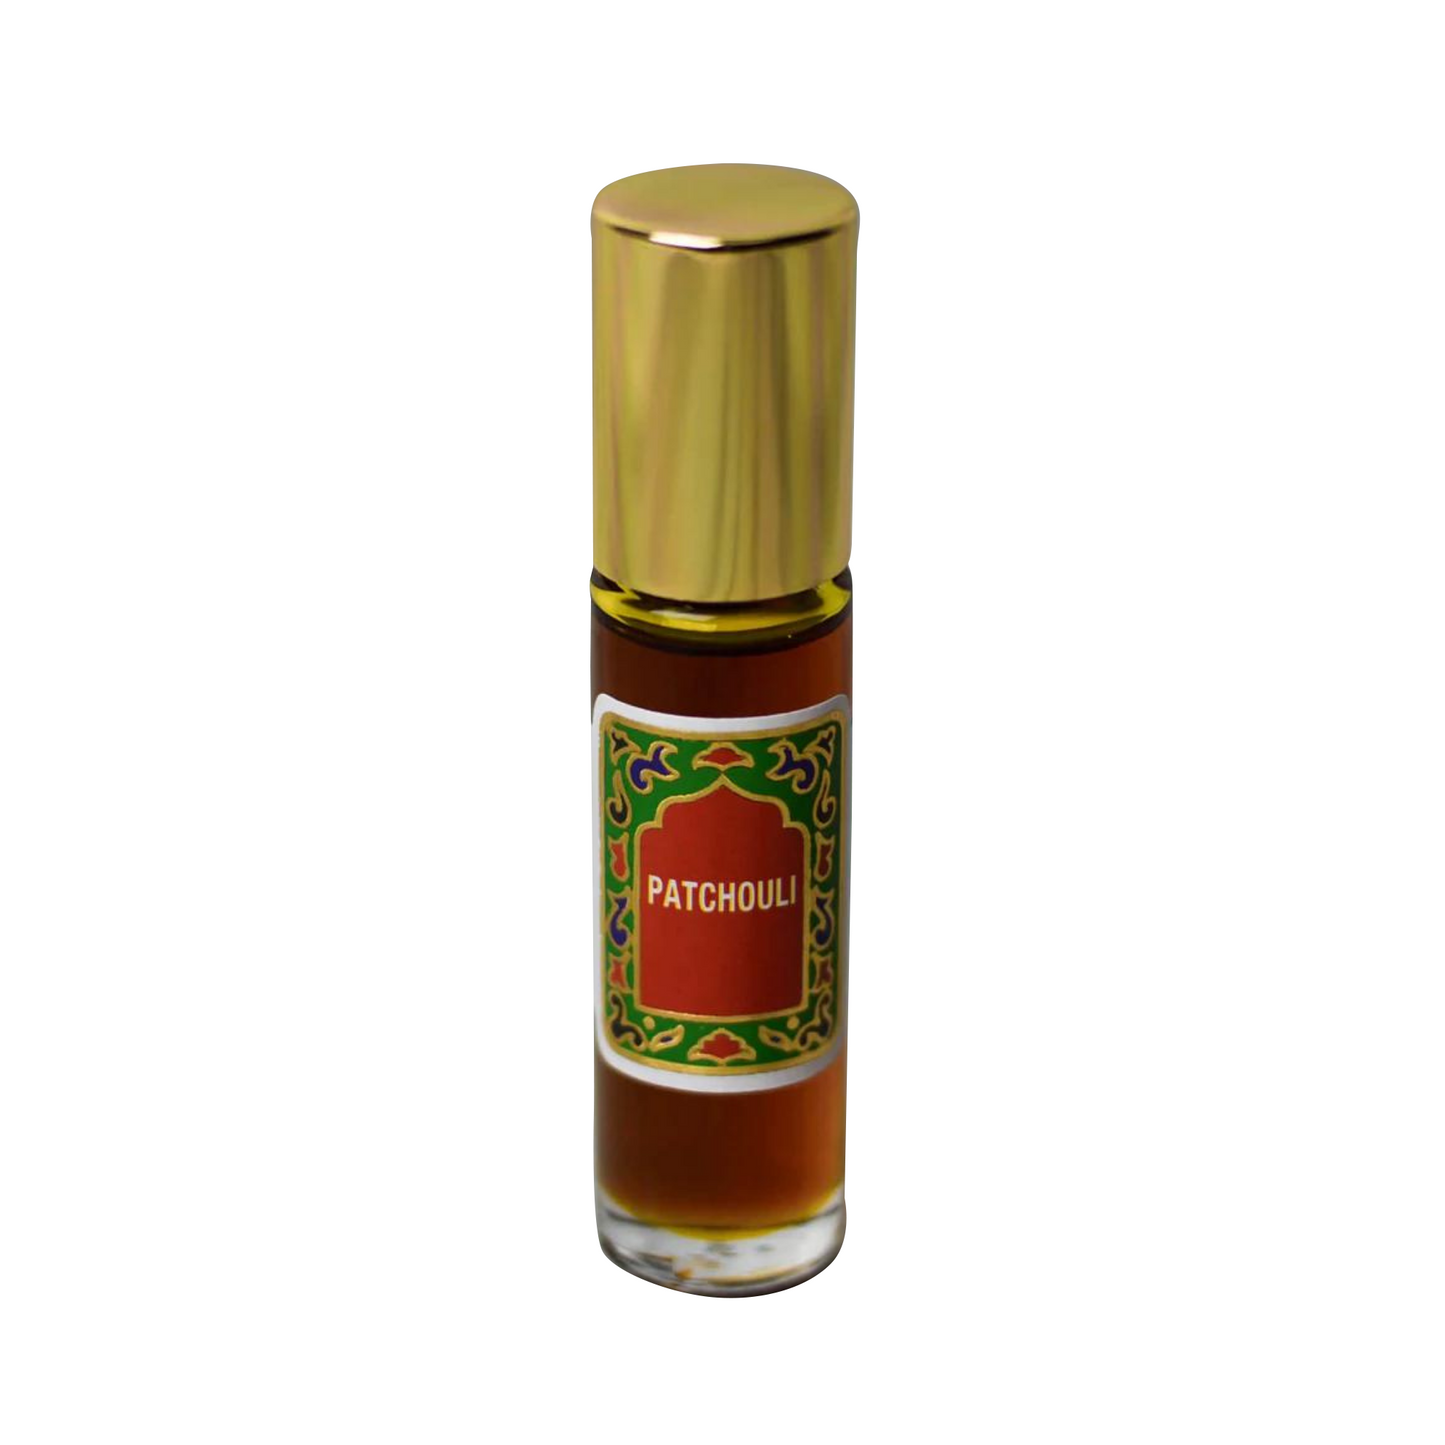 Primary image of Attar Patchouli Fragrance Roll-On